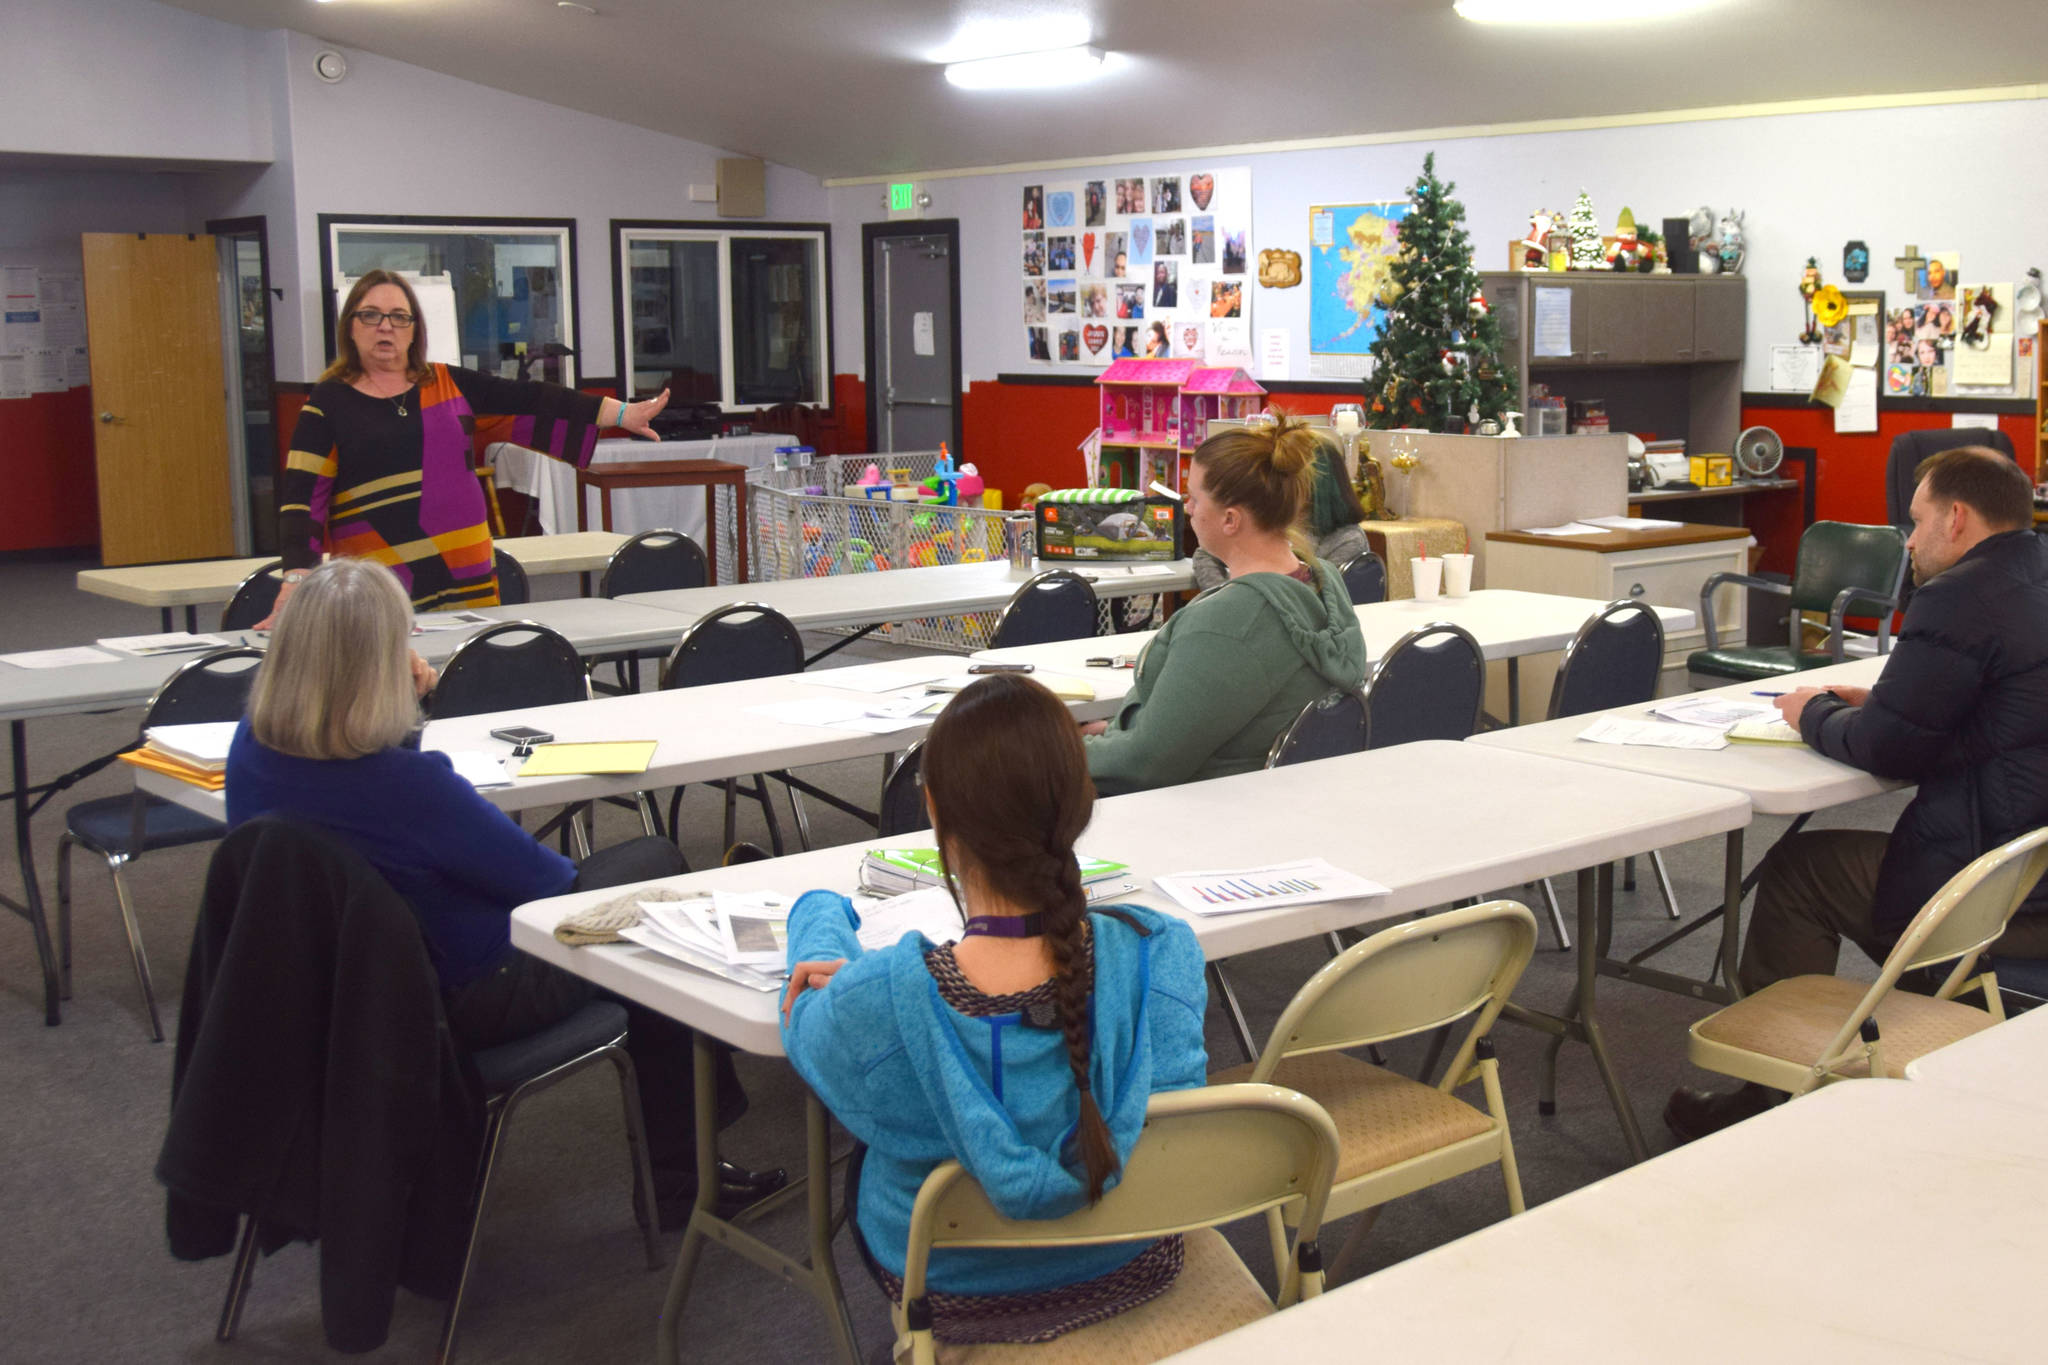 Members of a workgroup to acquire a permanent emergency shelter on the Kenai Peninsula meet at Love, INC in Soldotna, Alaska on Feb. 11, 2019. (Photo by Brian Mazurek/Peninsula Clarion)